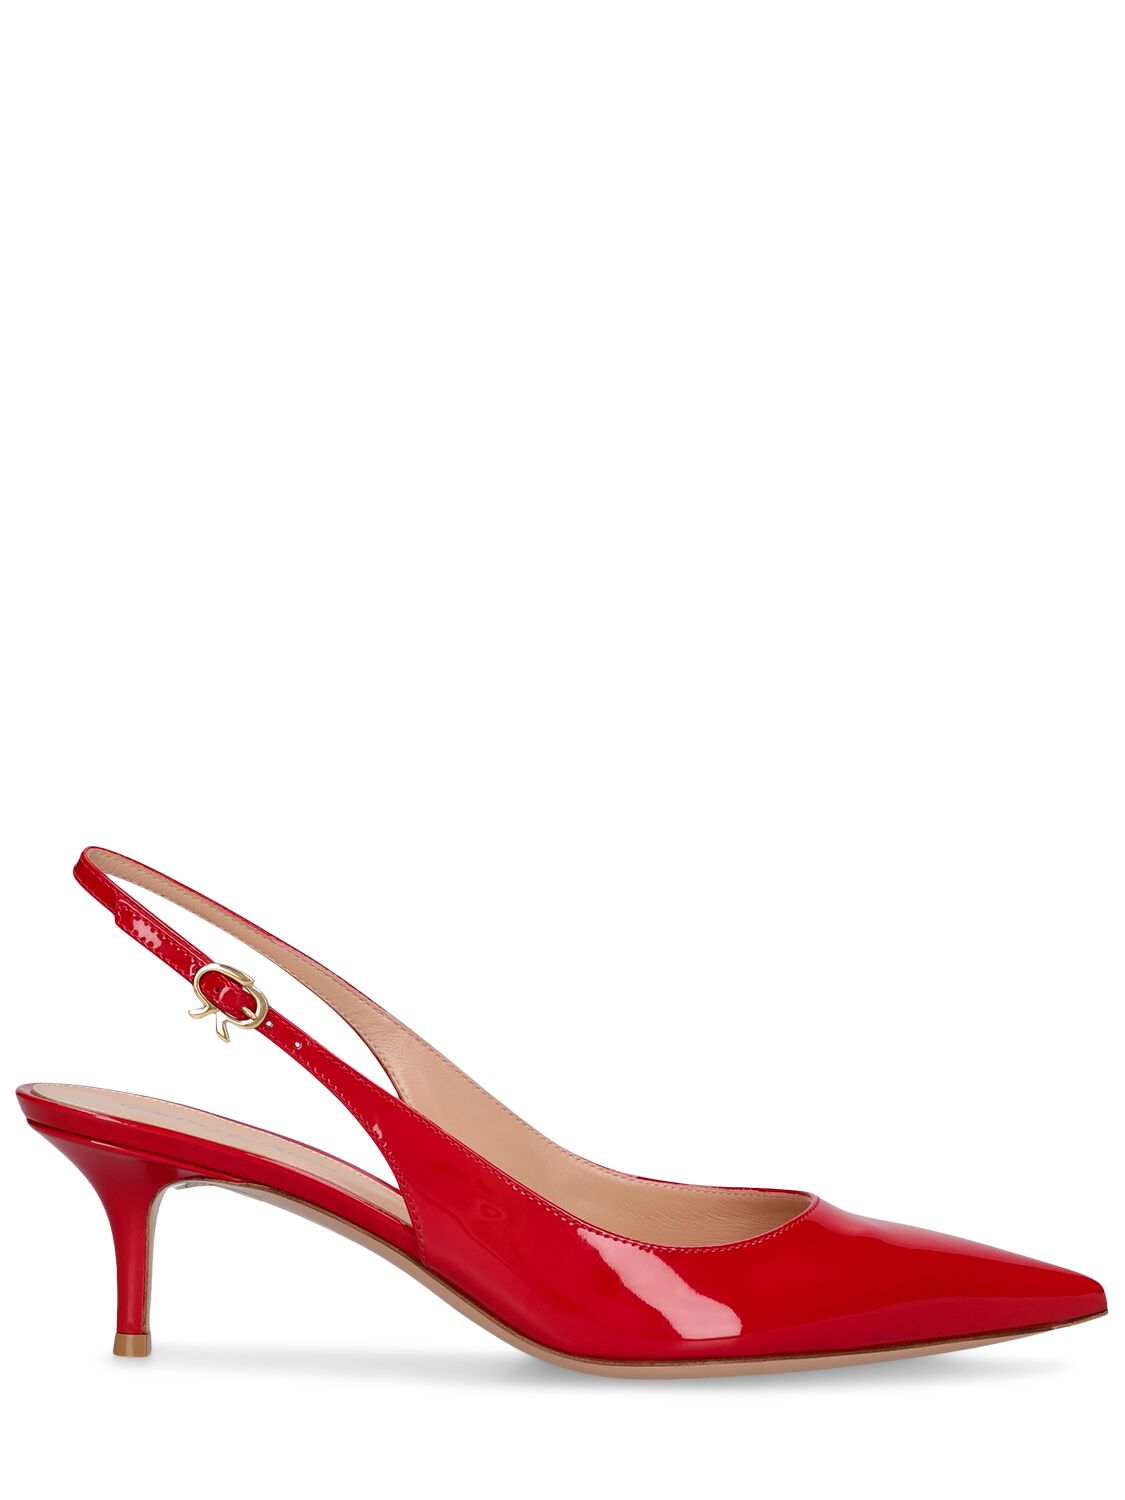 Gianvito Rossi 55mm Ribbon Patent Leather Pumps In Red